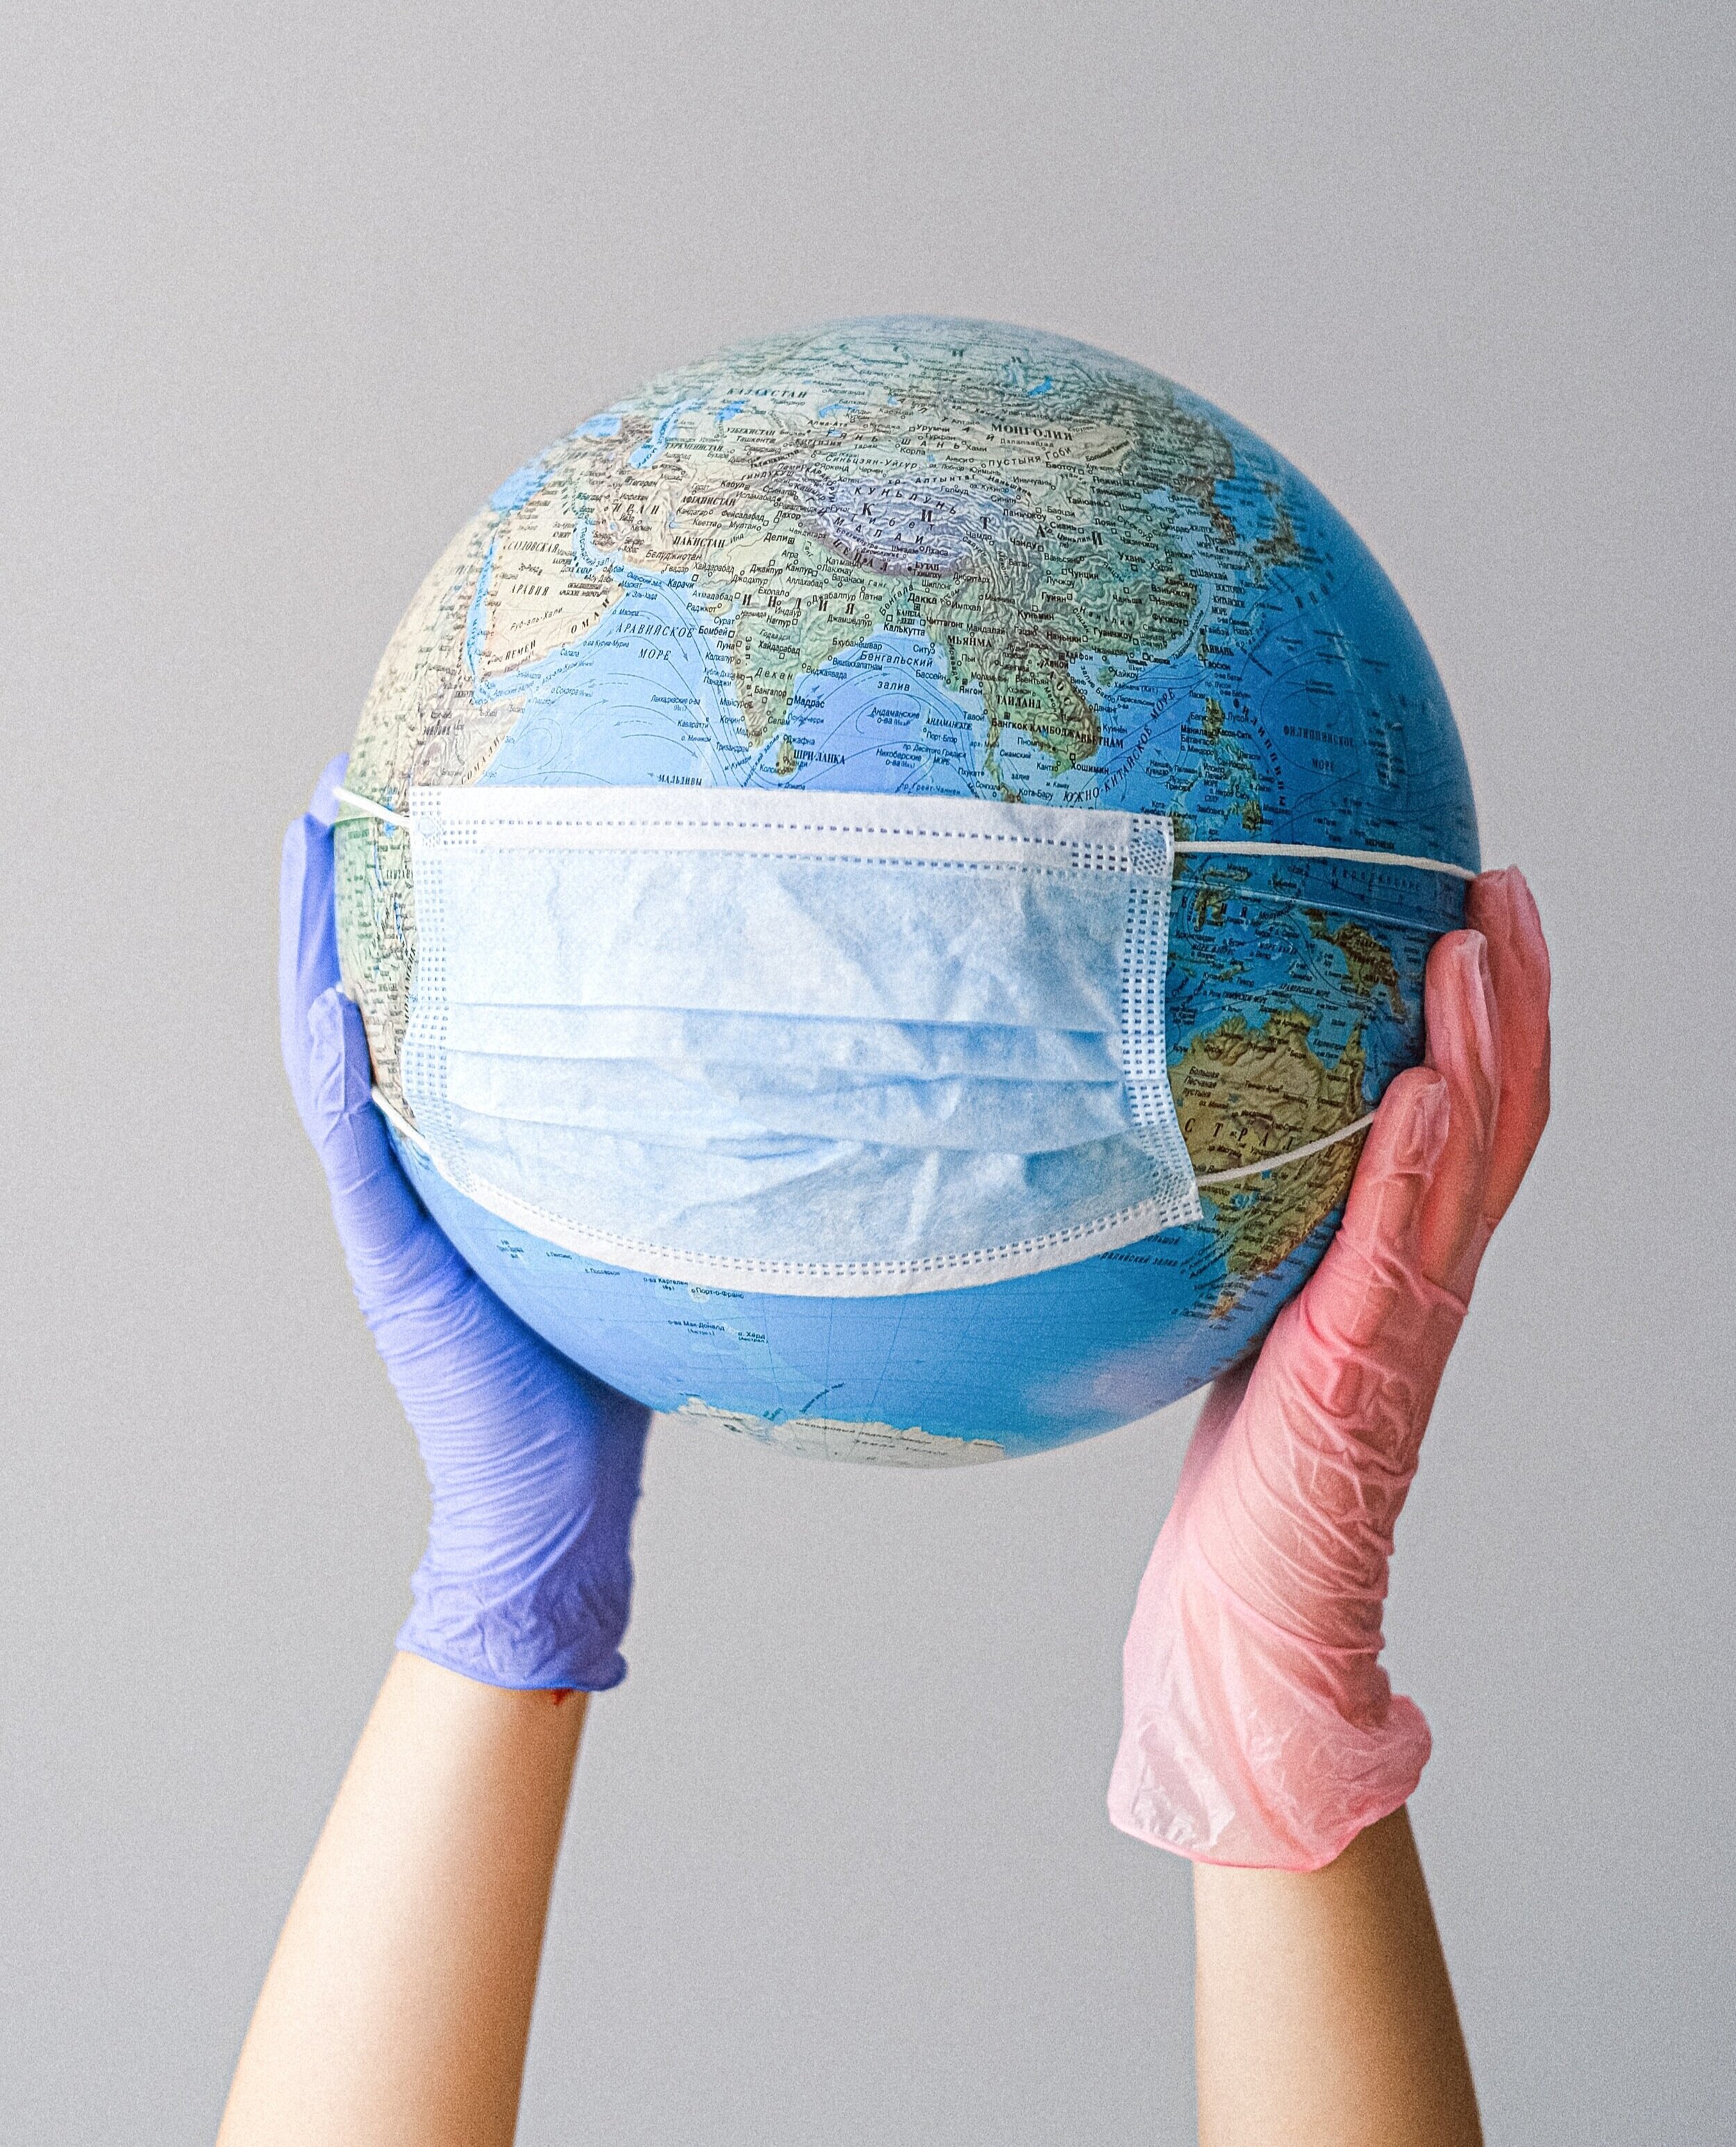 hands-with-latex-gloves-holding-a-globe-with-a-face-mask-4167544.jpg